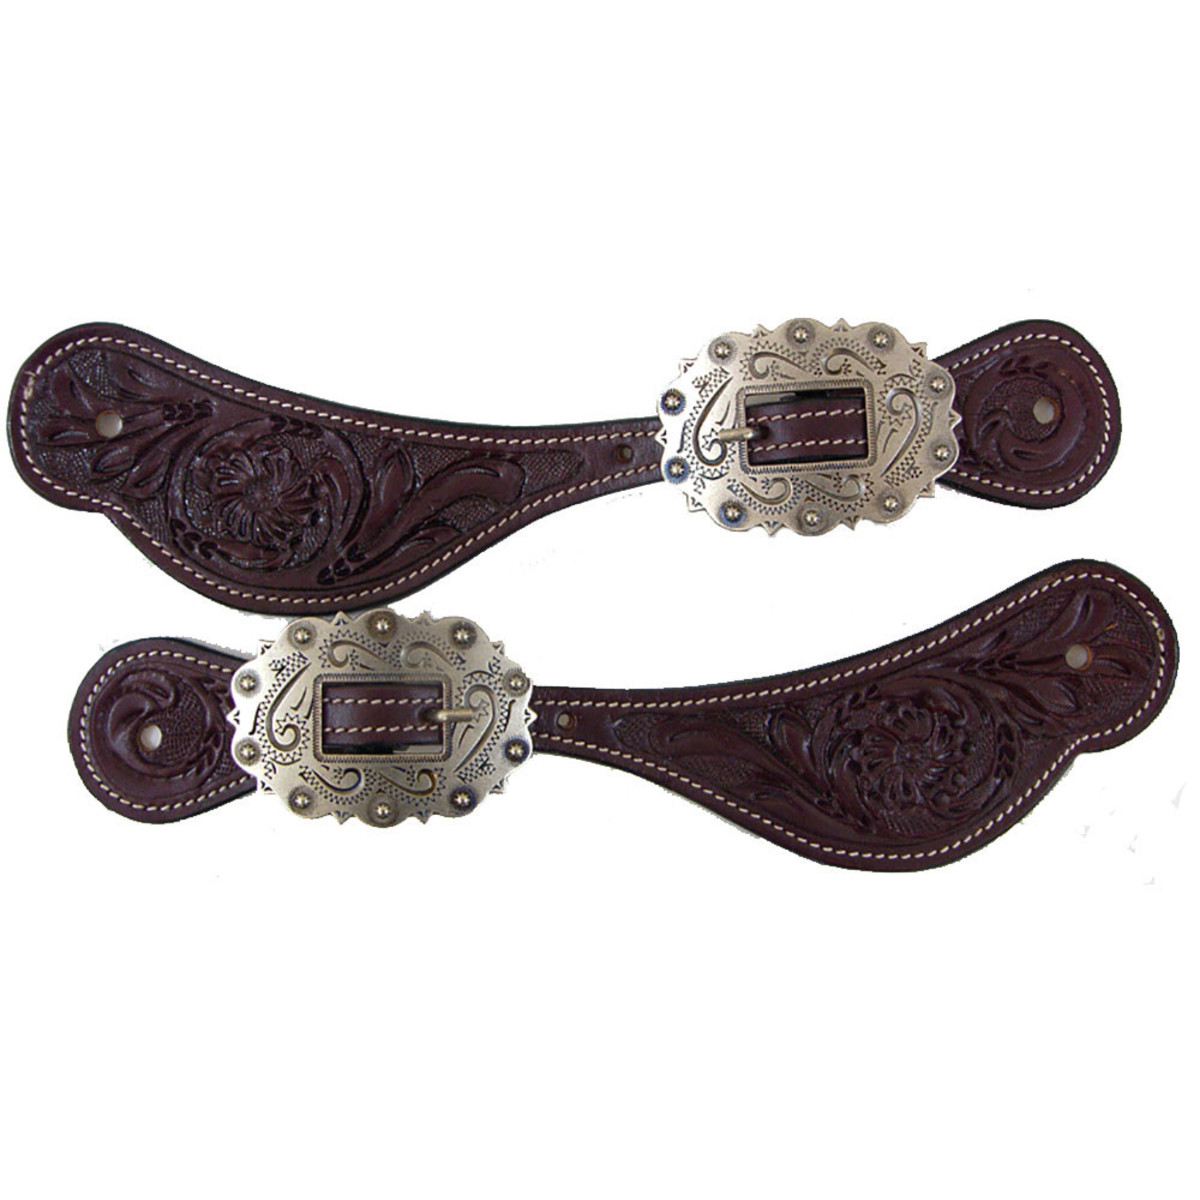 Shaped Leather Floral Tooled Western Spur Straps Tooled Leather Western Spur Straps Large Silver Buckle Dark Brown